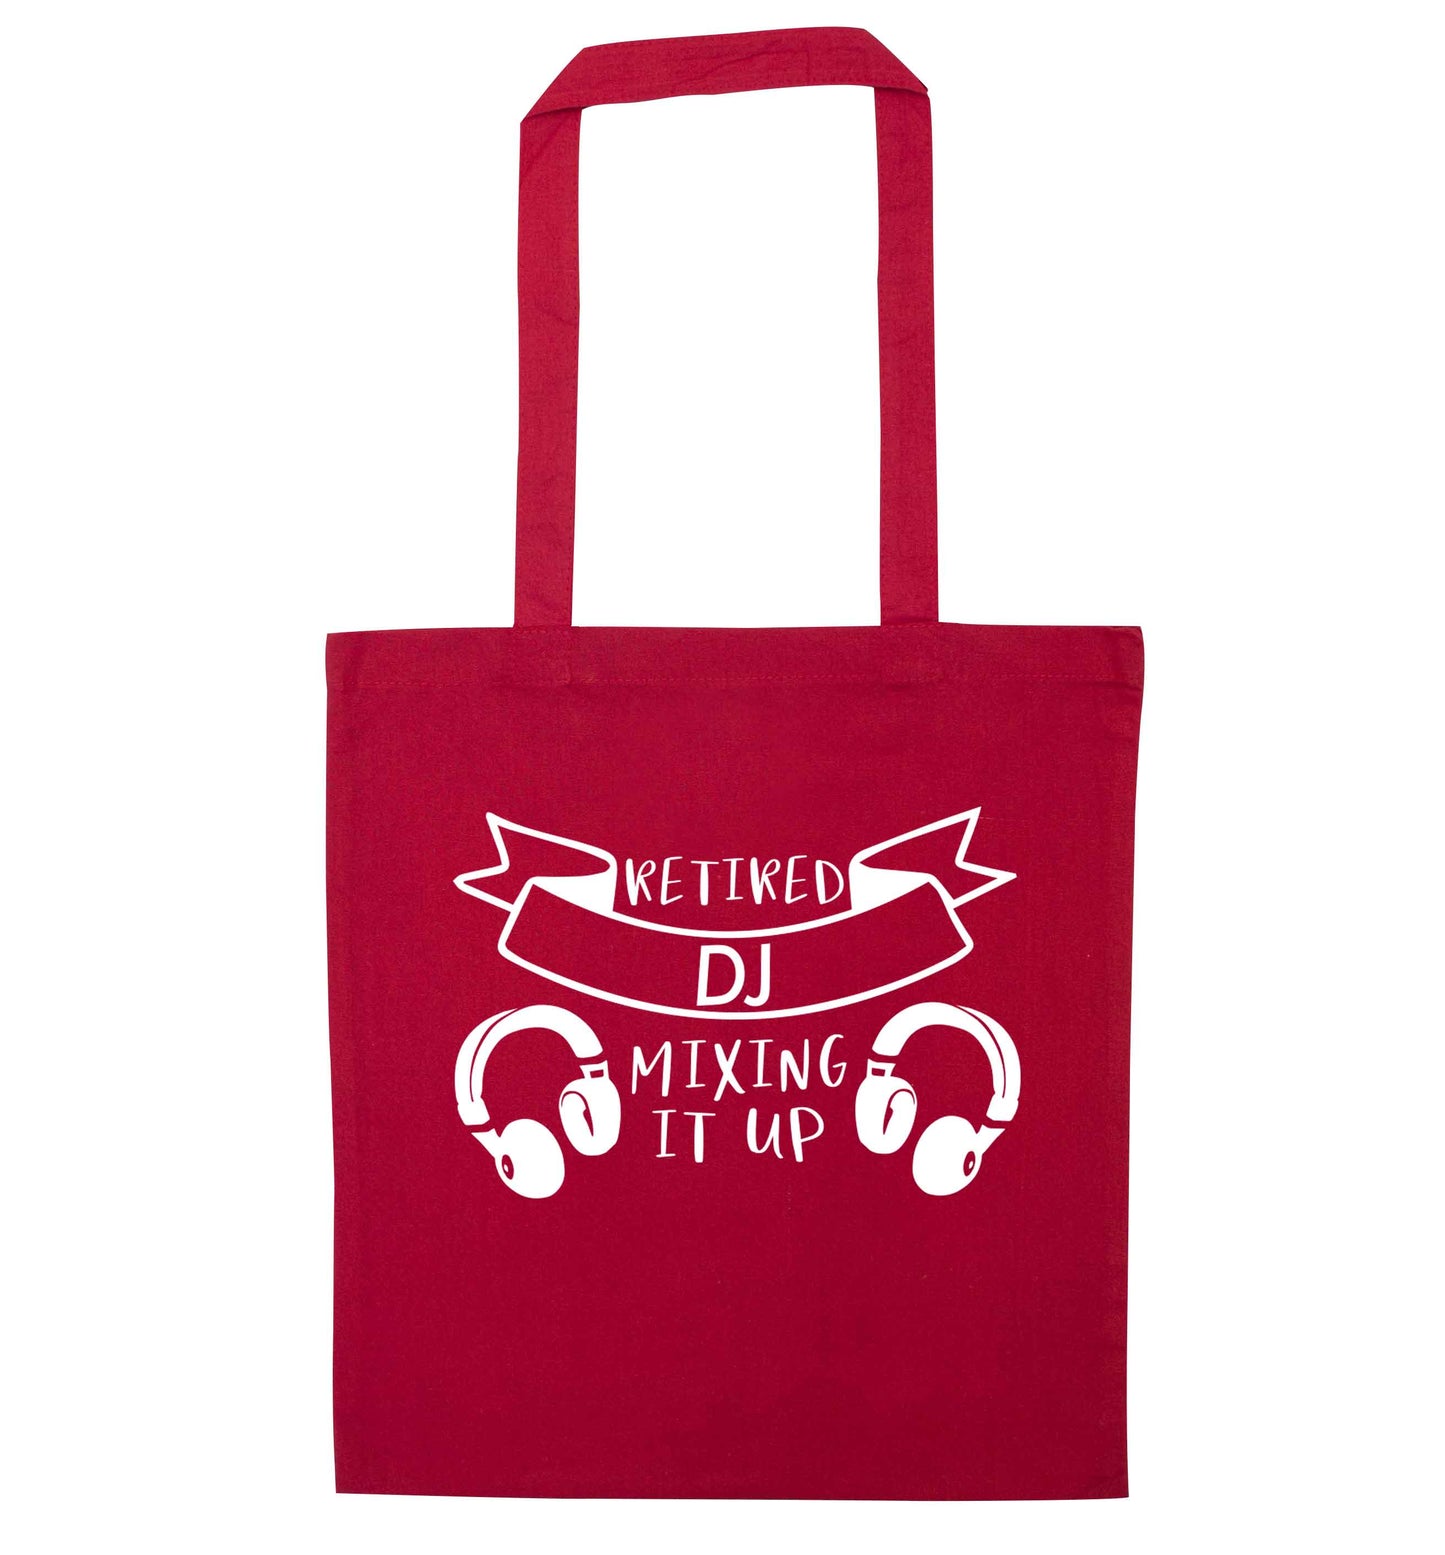 Retired DJ mixing it up red tote bag